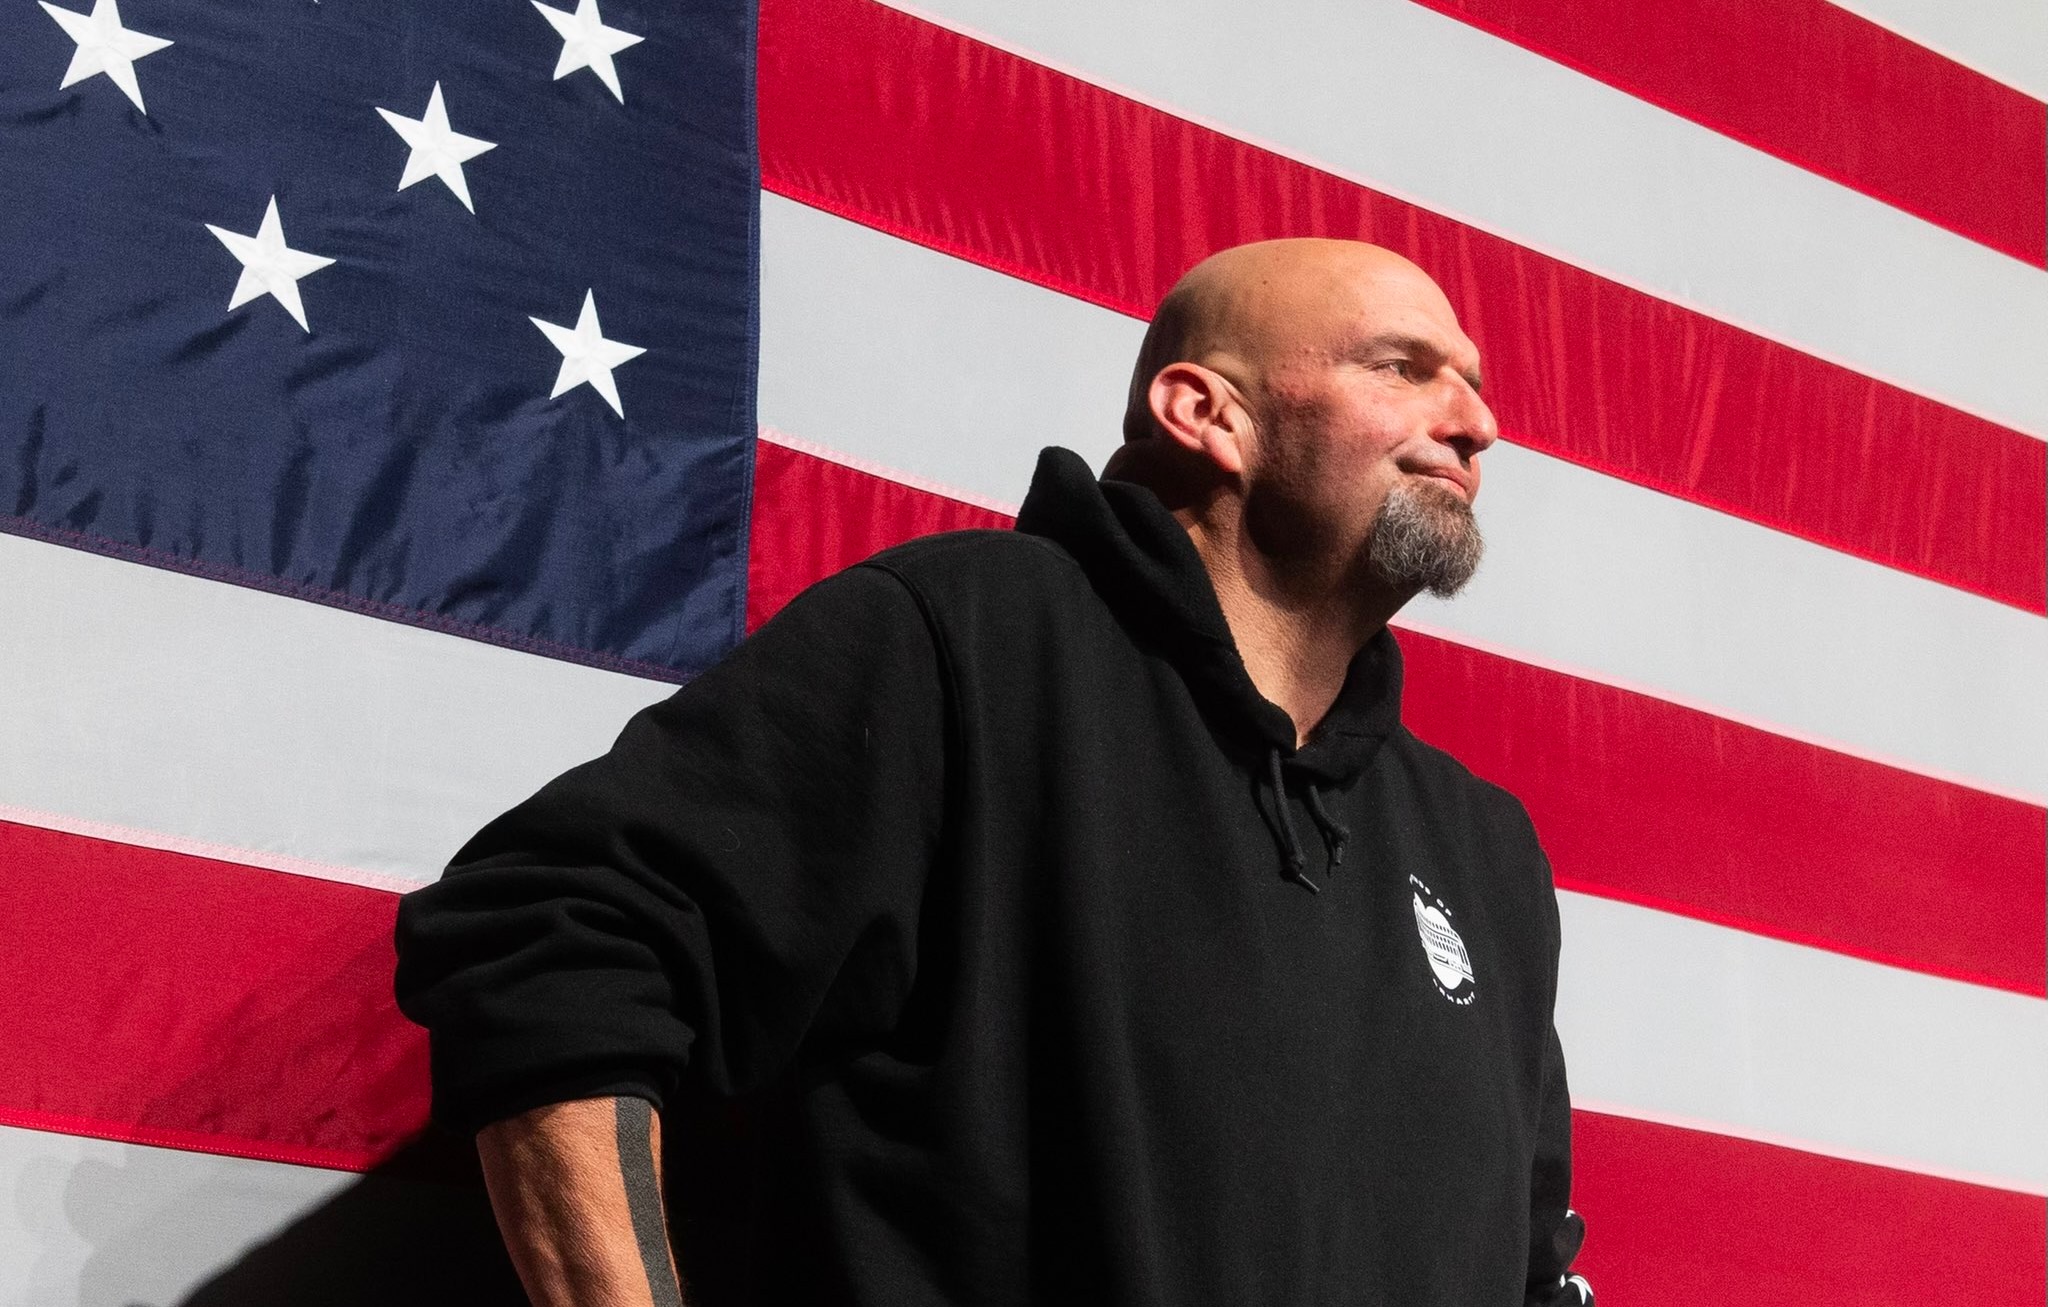 A photograph of Senate candidate John Fetterman standing in front of an American flag wearing a black hoodie.